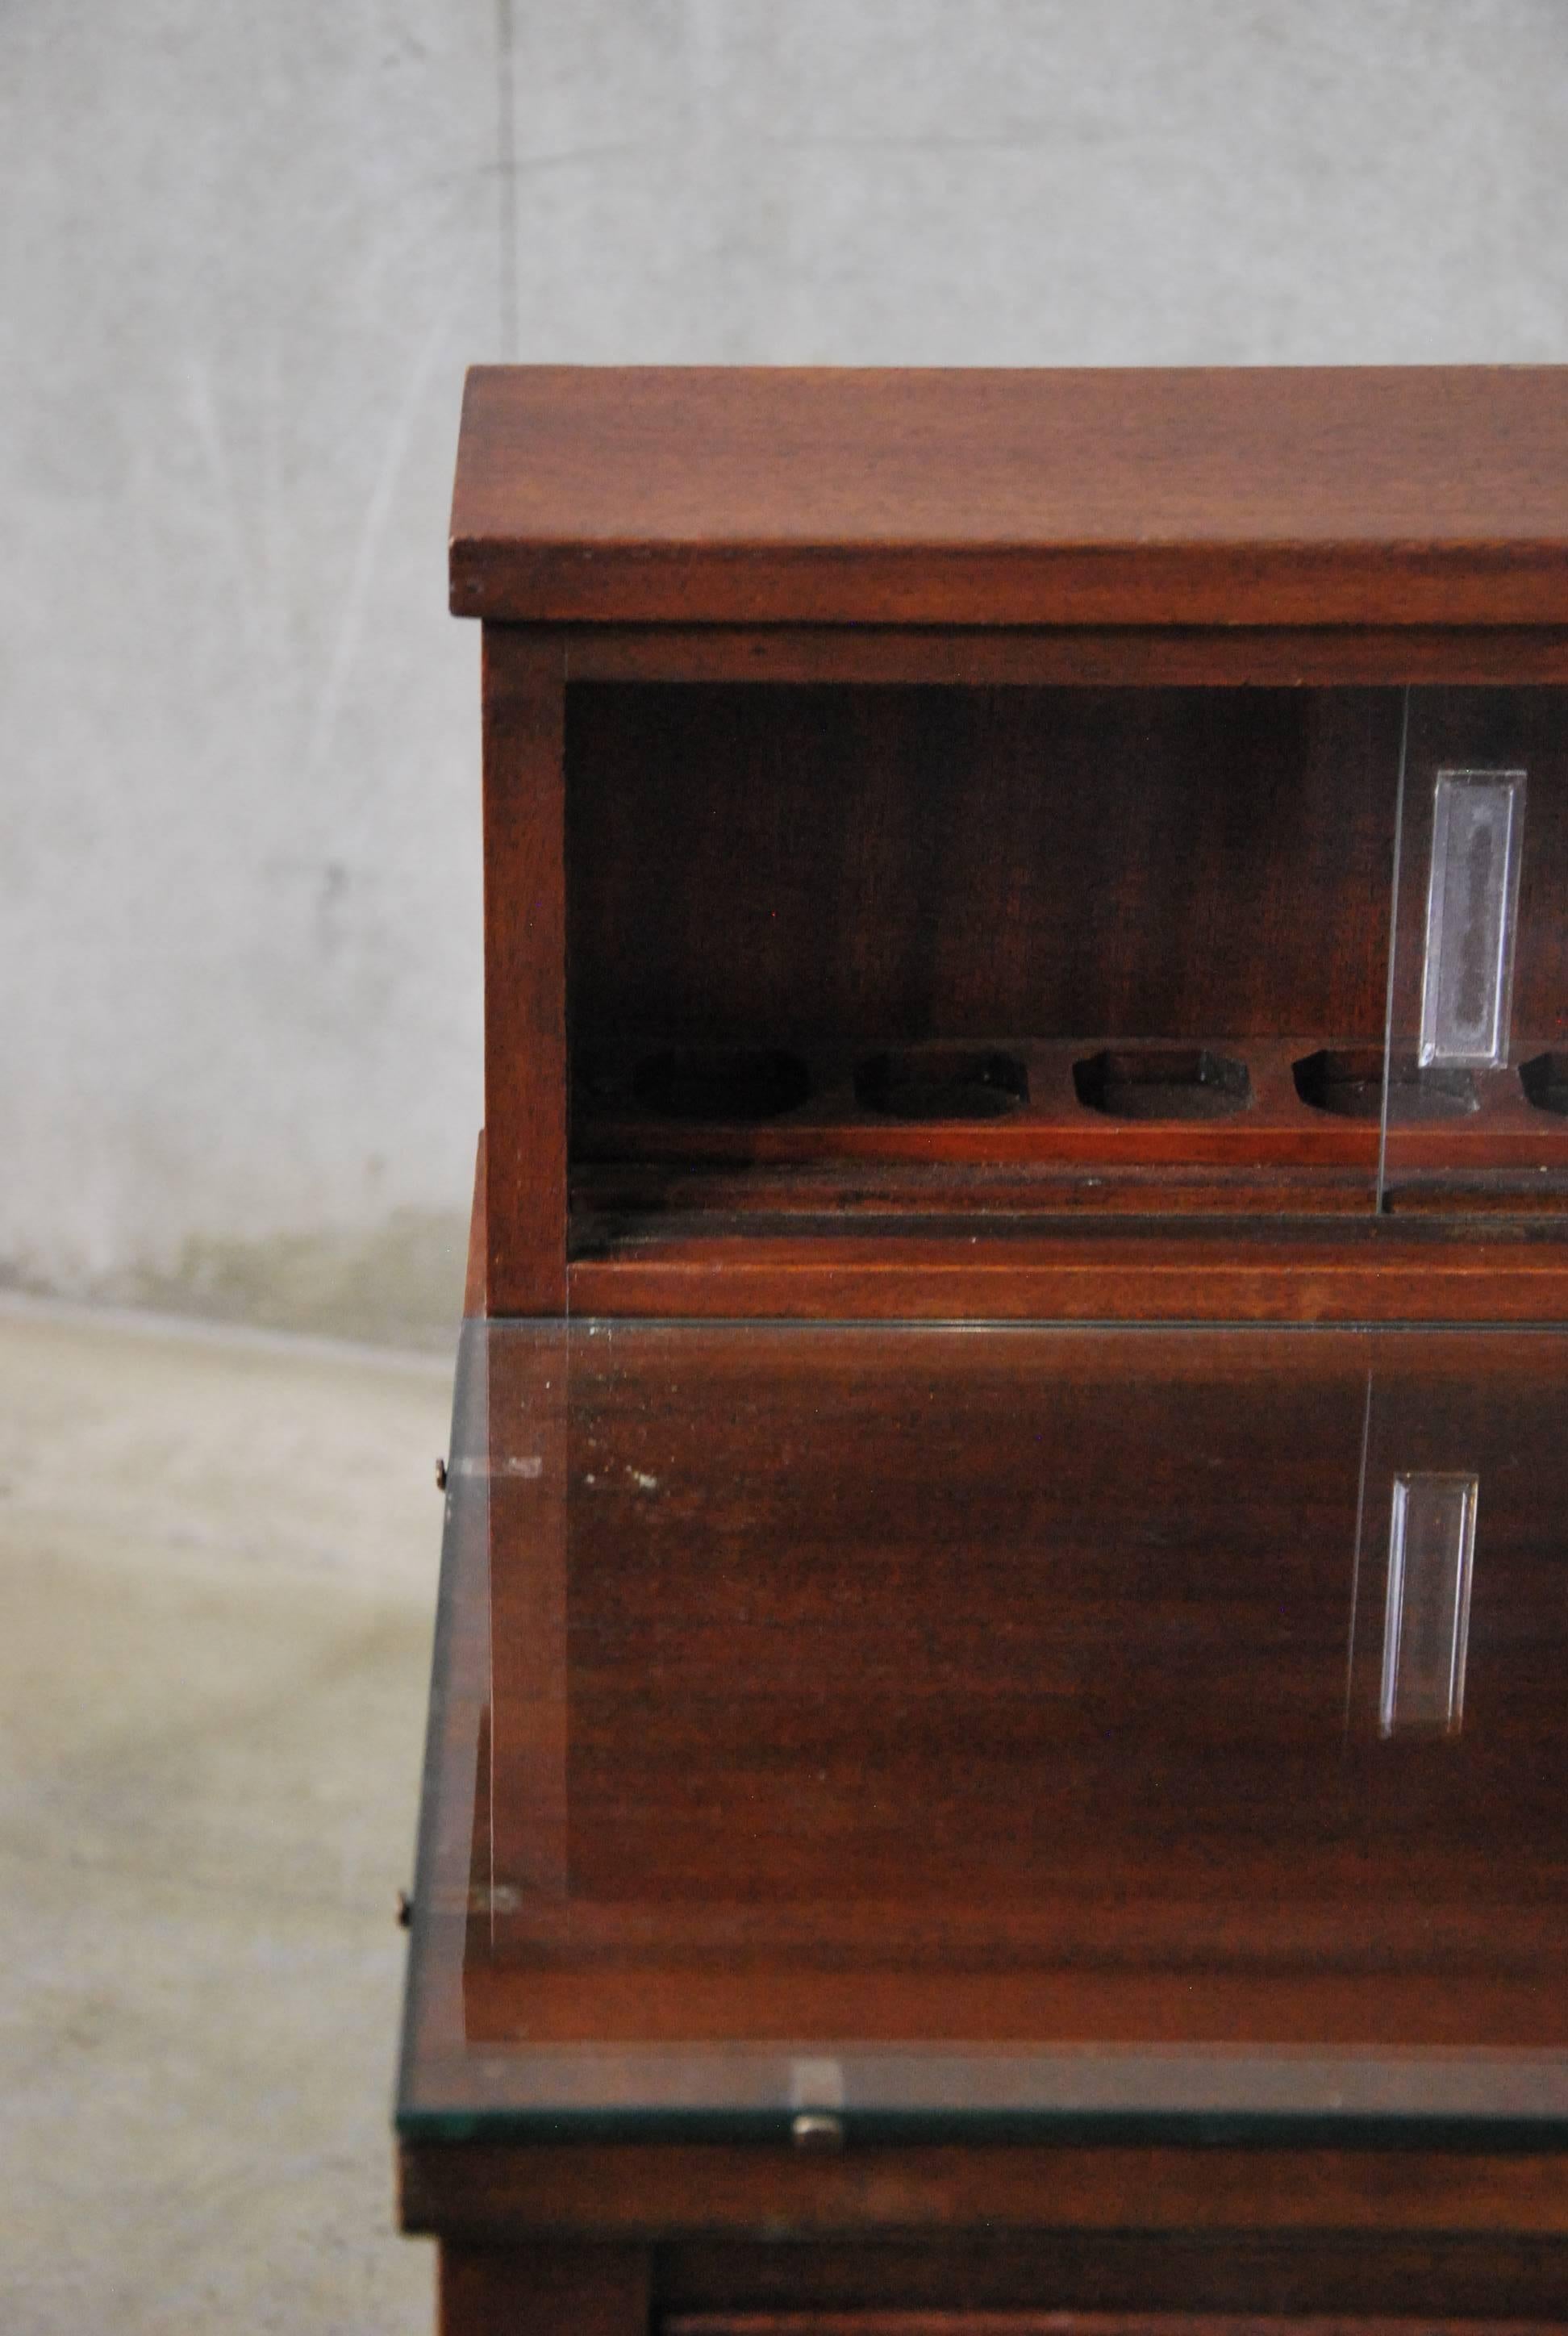 Very unusually small dental cabinet, dated 1930 and found in Southern Ontario. Complete, and in perfect condition, including original, untouched mahogany surfaces. All drawers function and have lined metal interiors. Would make a great bedside